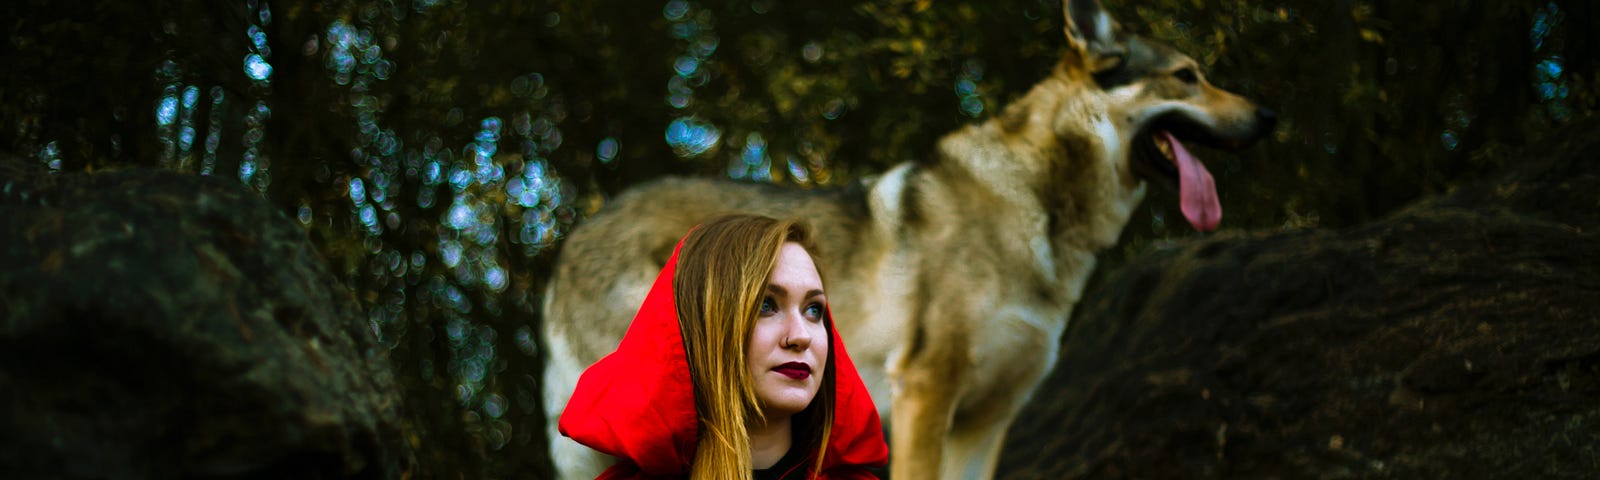 A woman dressed as Red Riding Hood is standing in a forest. A wolf-like dog isstanding behind her.